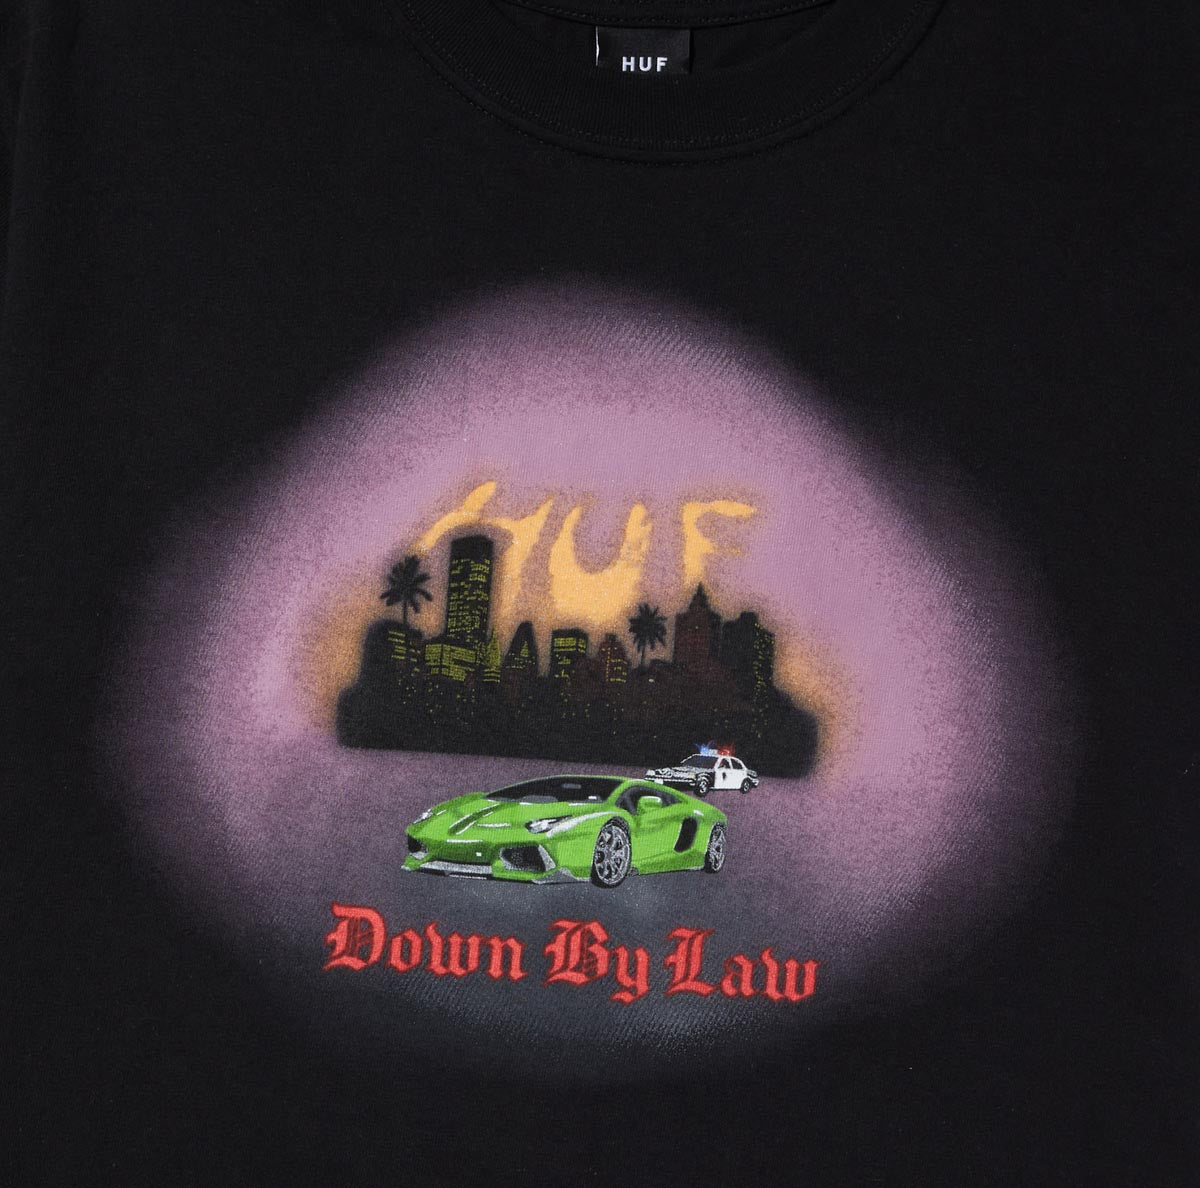 HUF Down By Law T-Shirt - Black image 2